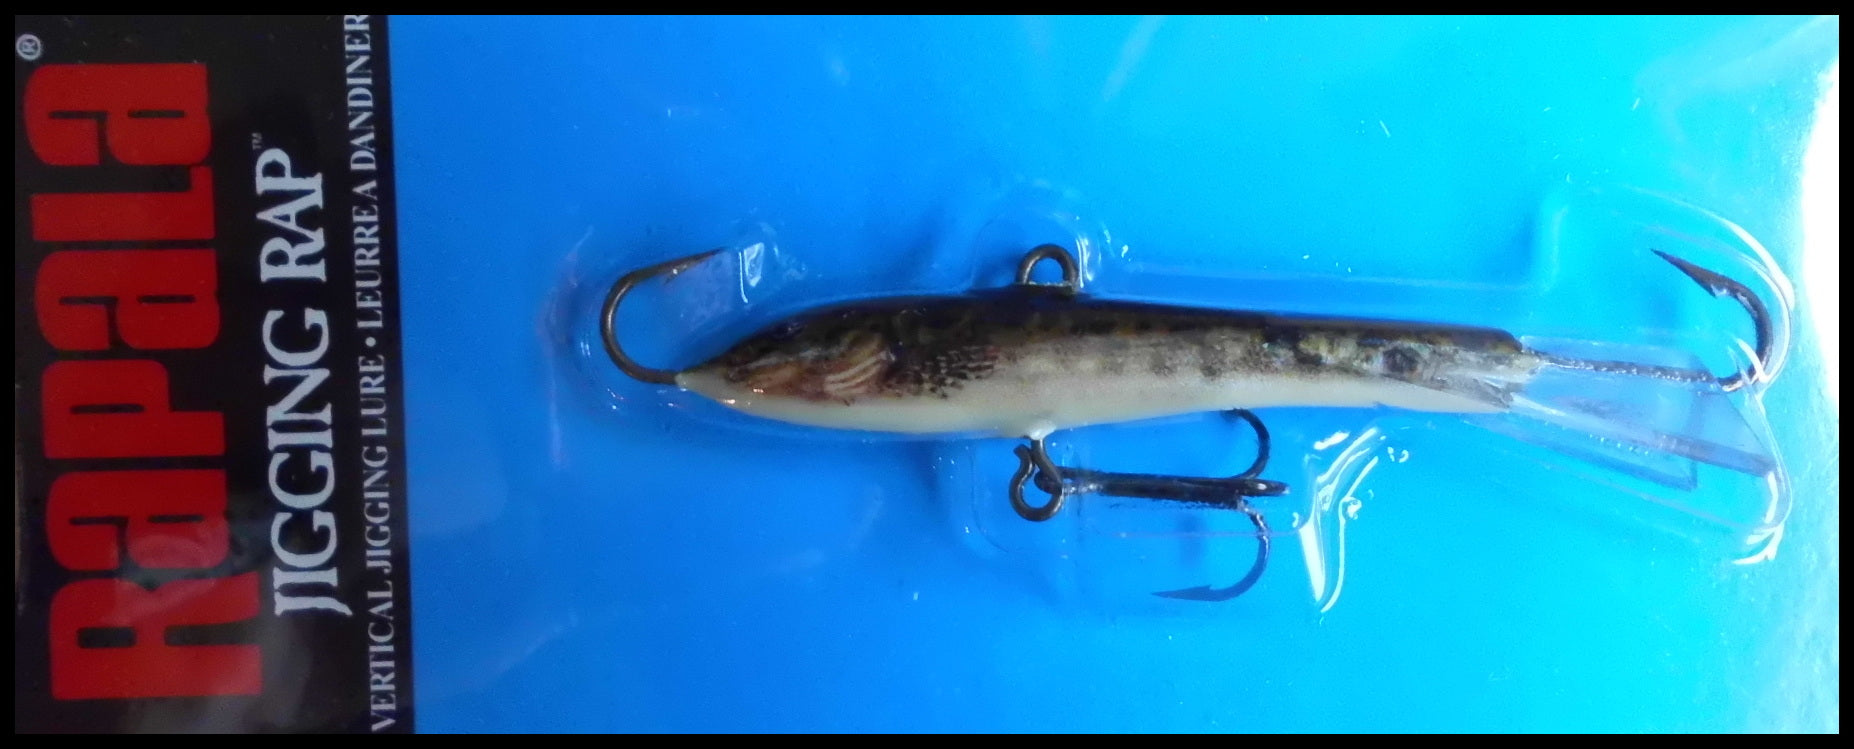 Featured Lure: Rapala Jigging Rap - On The Water